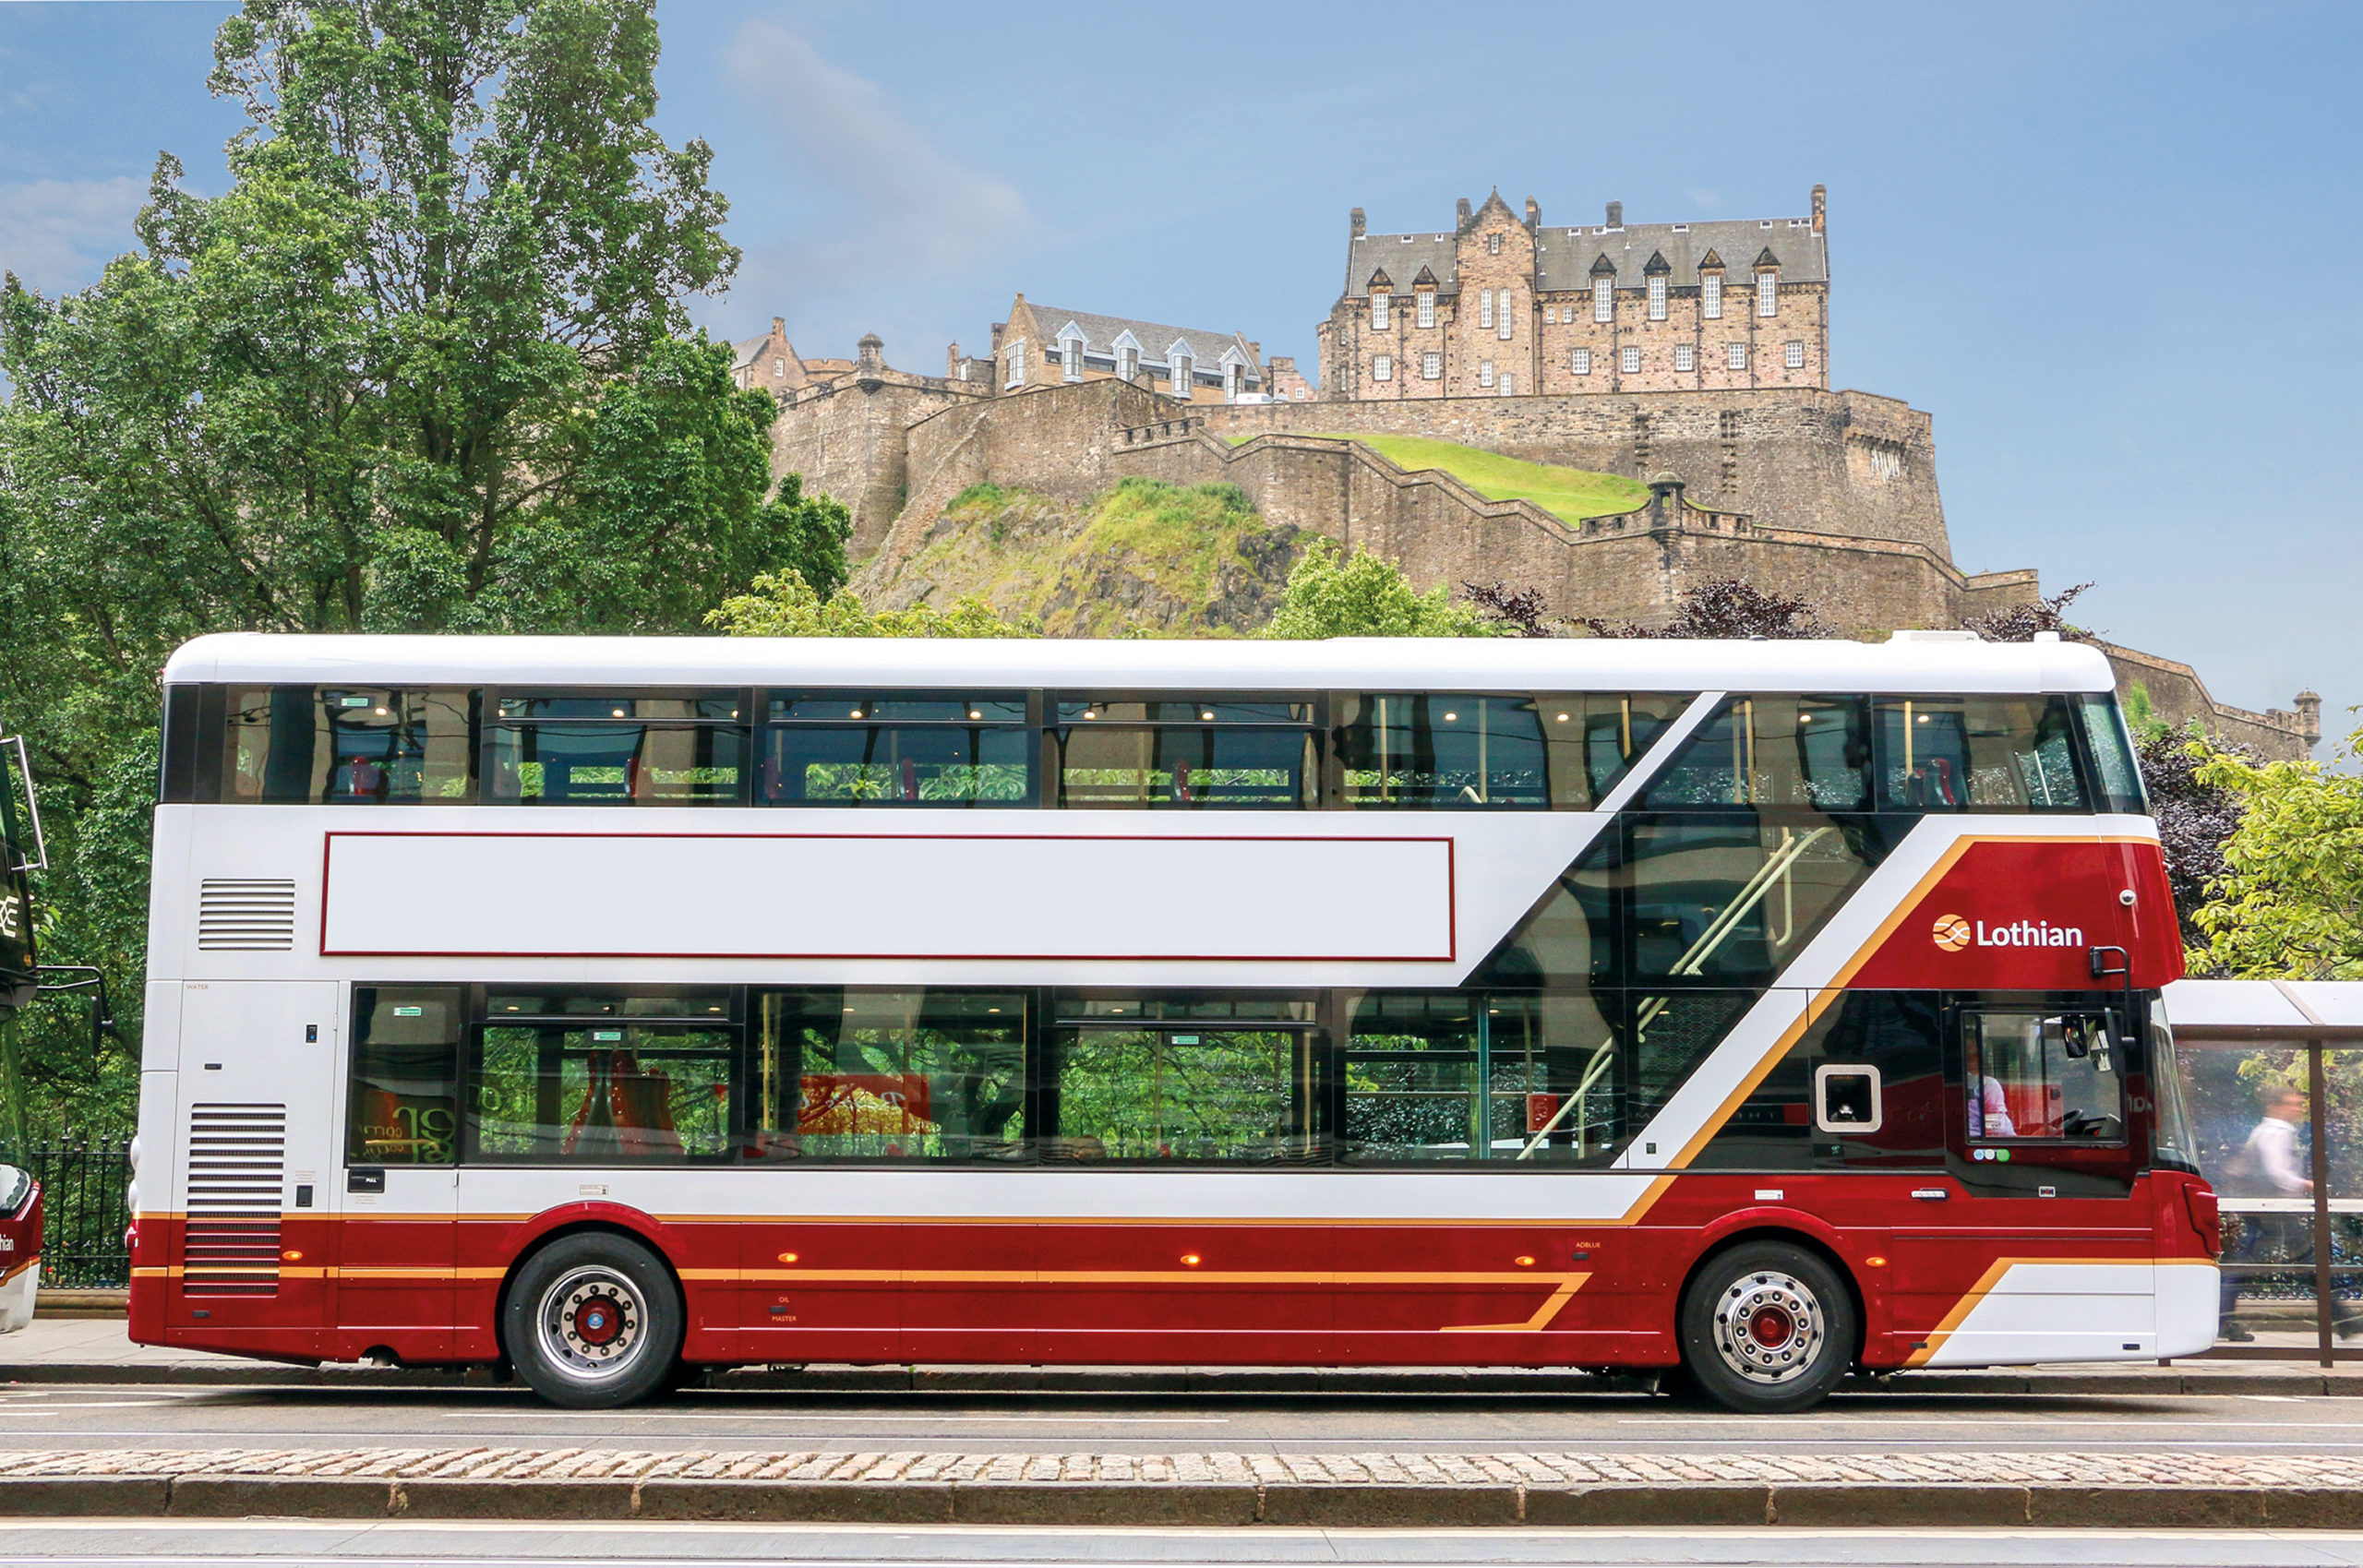 Kleanbus to repower Lothian diesels to electric